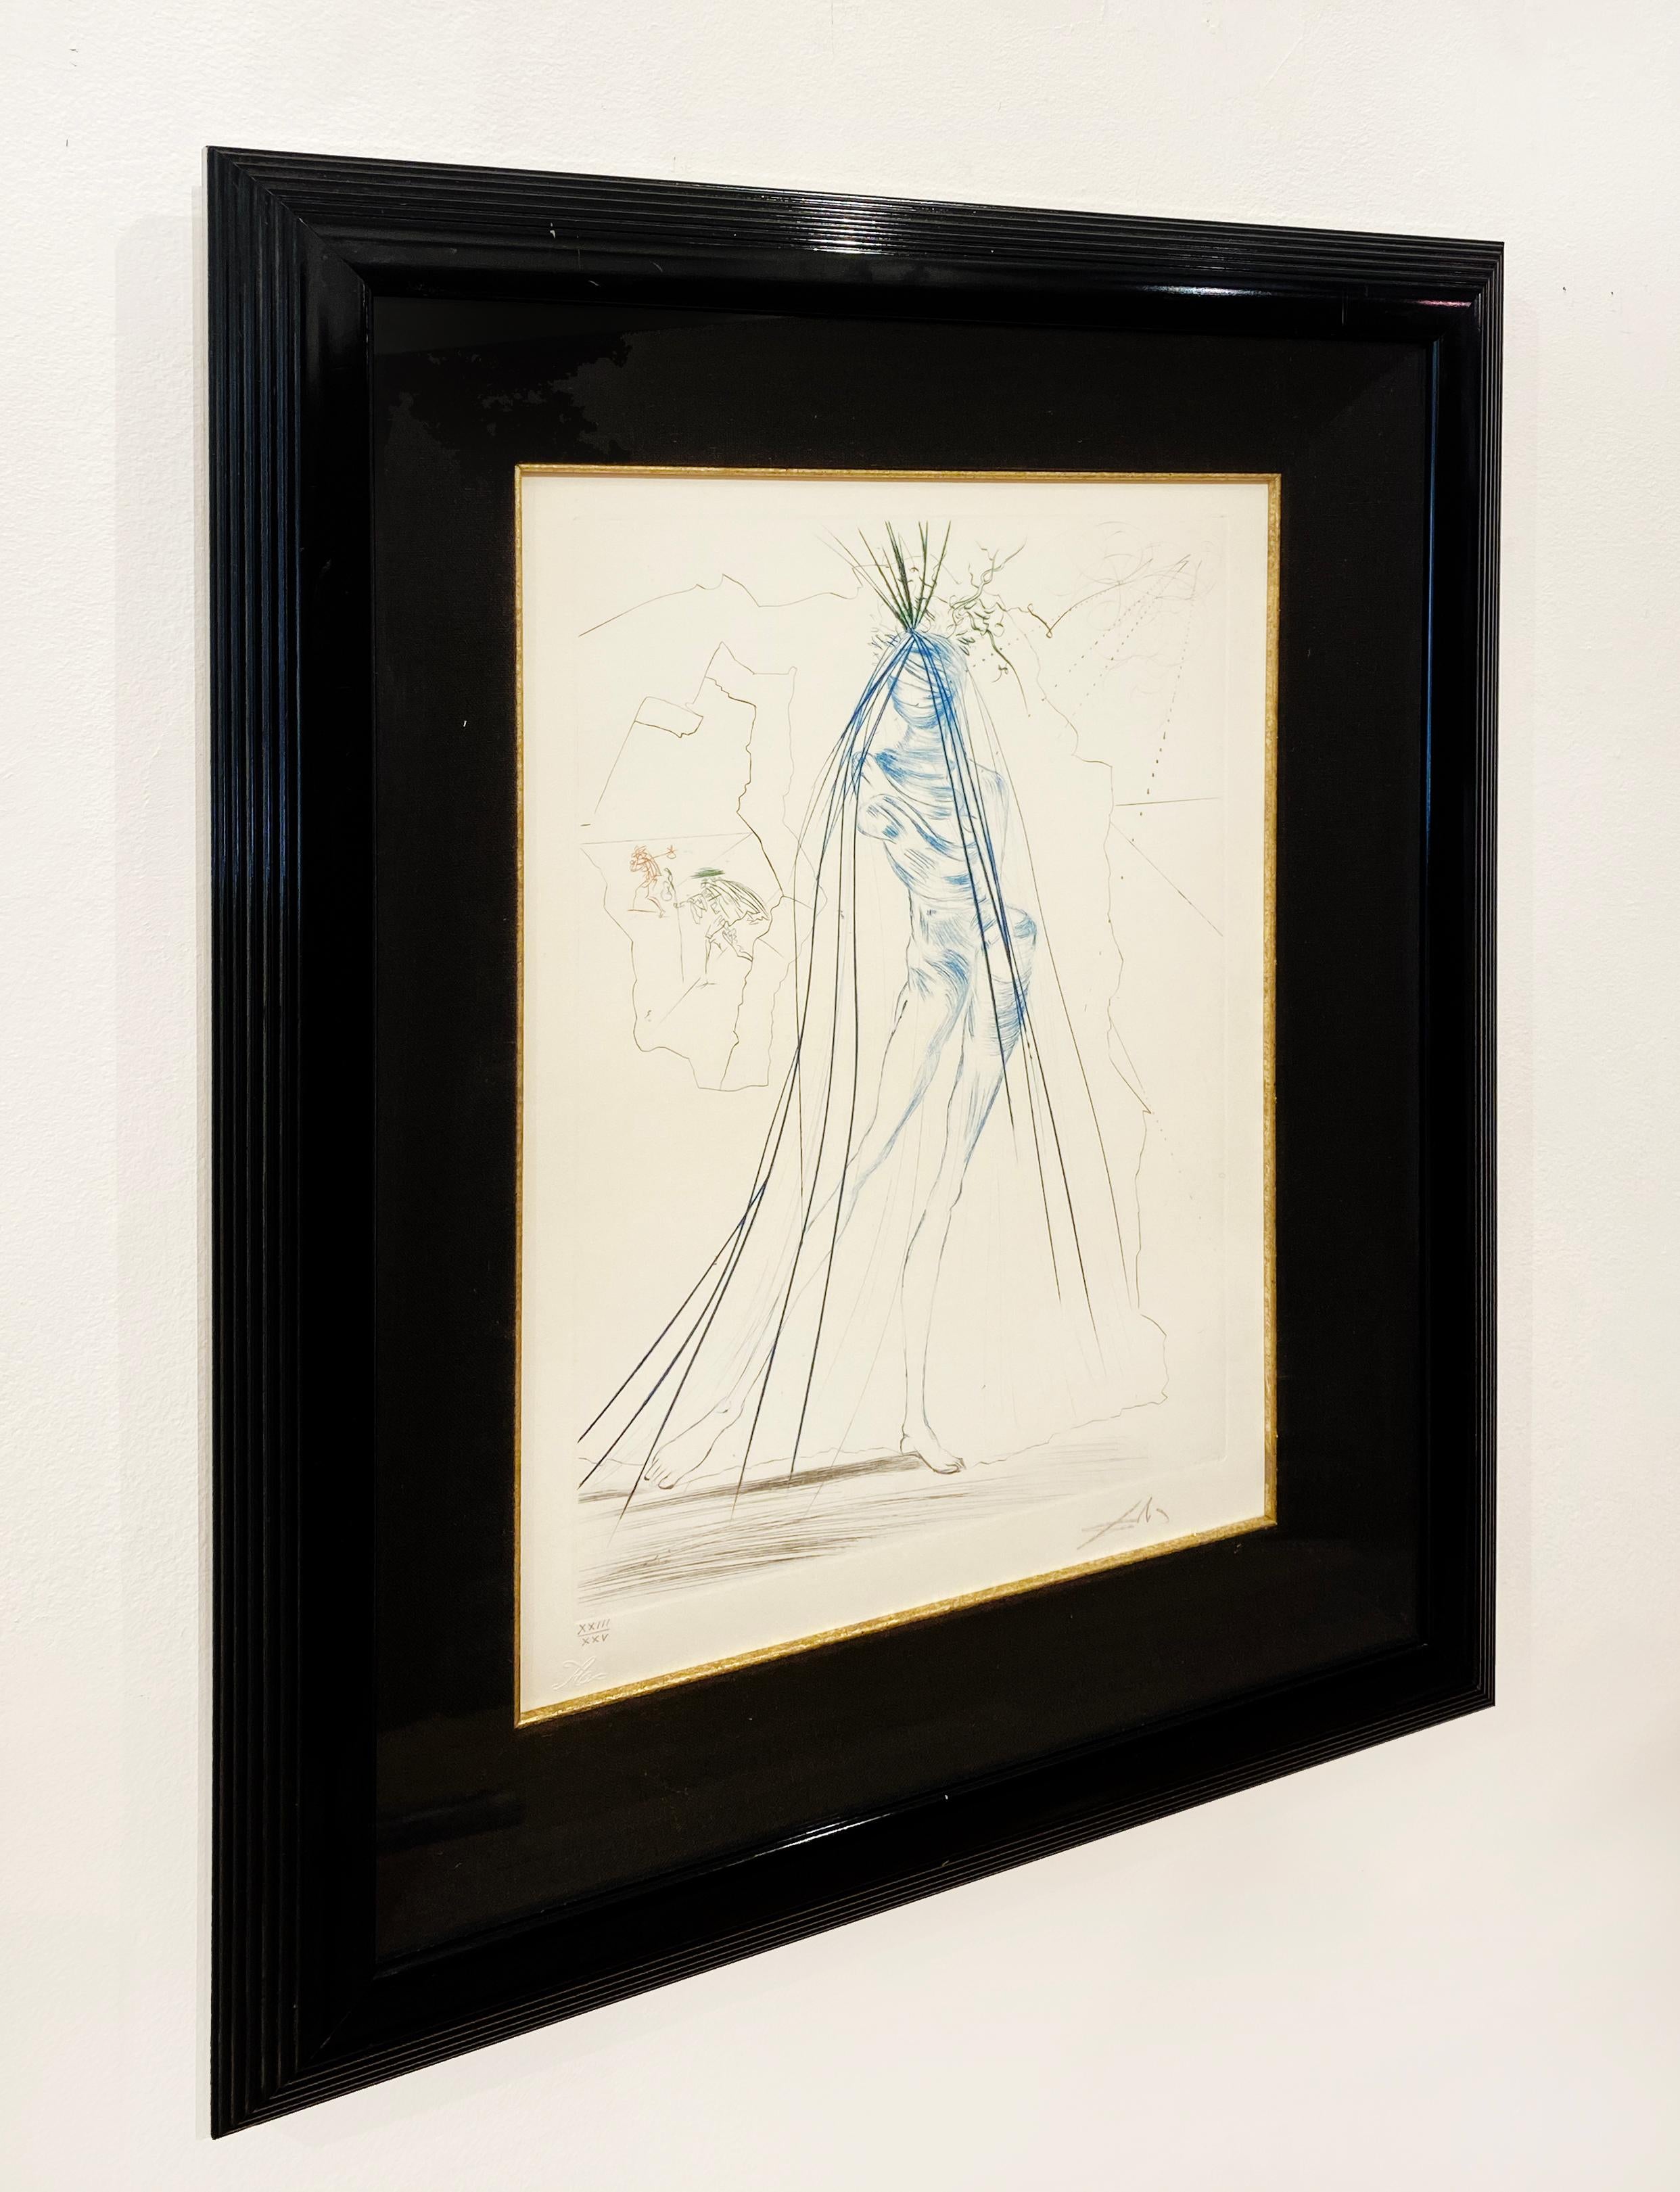 Artist:  Dali, Salvador
Title:  Iseult of the White Hands (duplicate)
Series:  Tristan et Iseult
Date:  1970
Medium:  drypoint printed in color
Framed Dimensions:  25.5